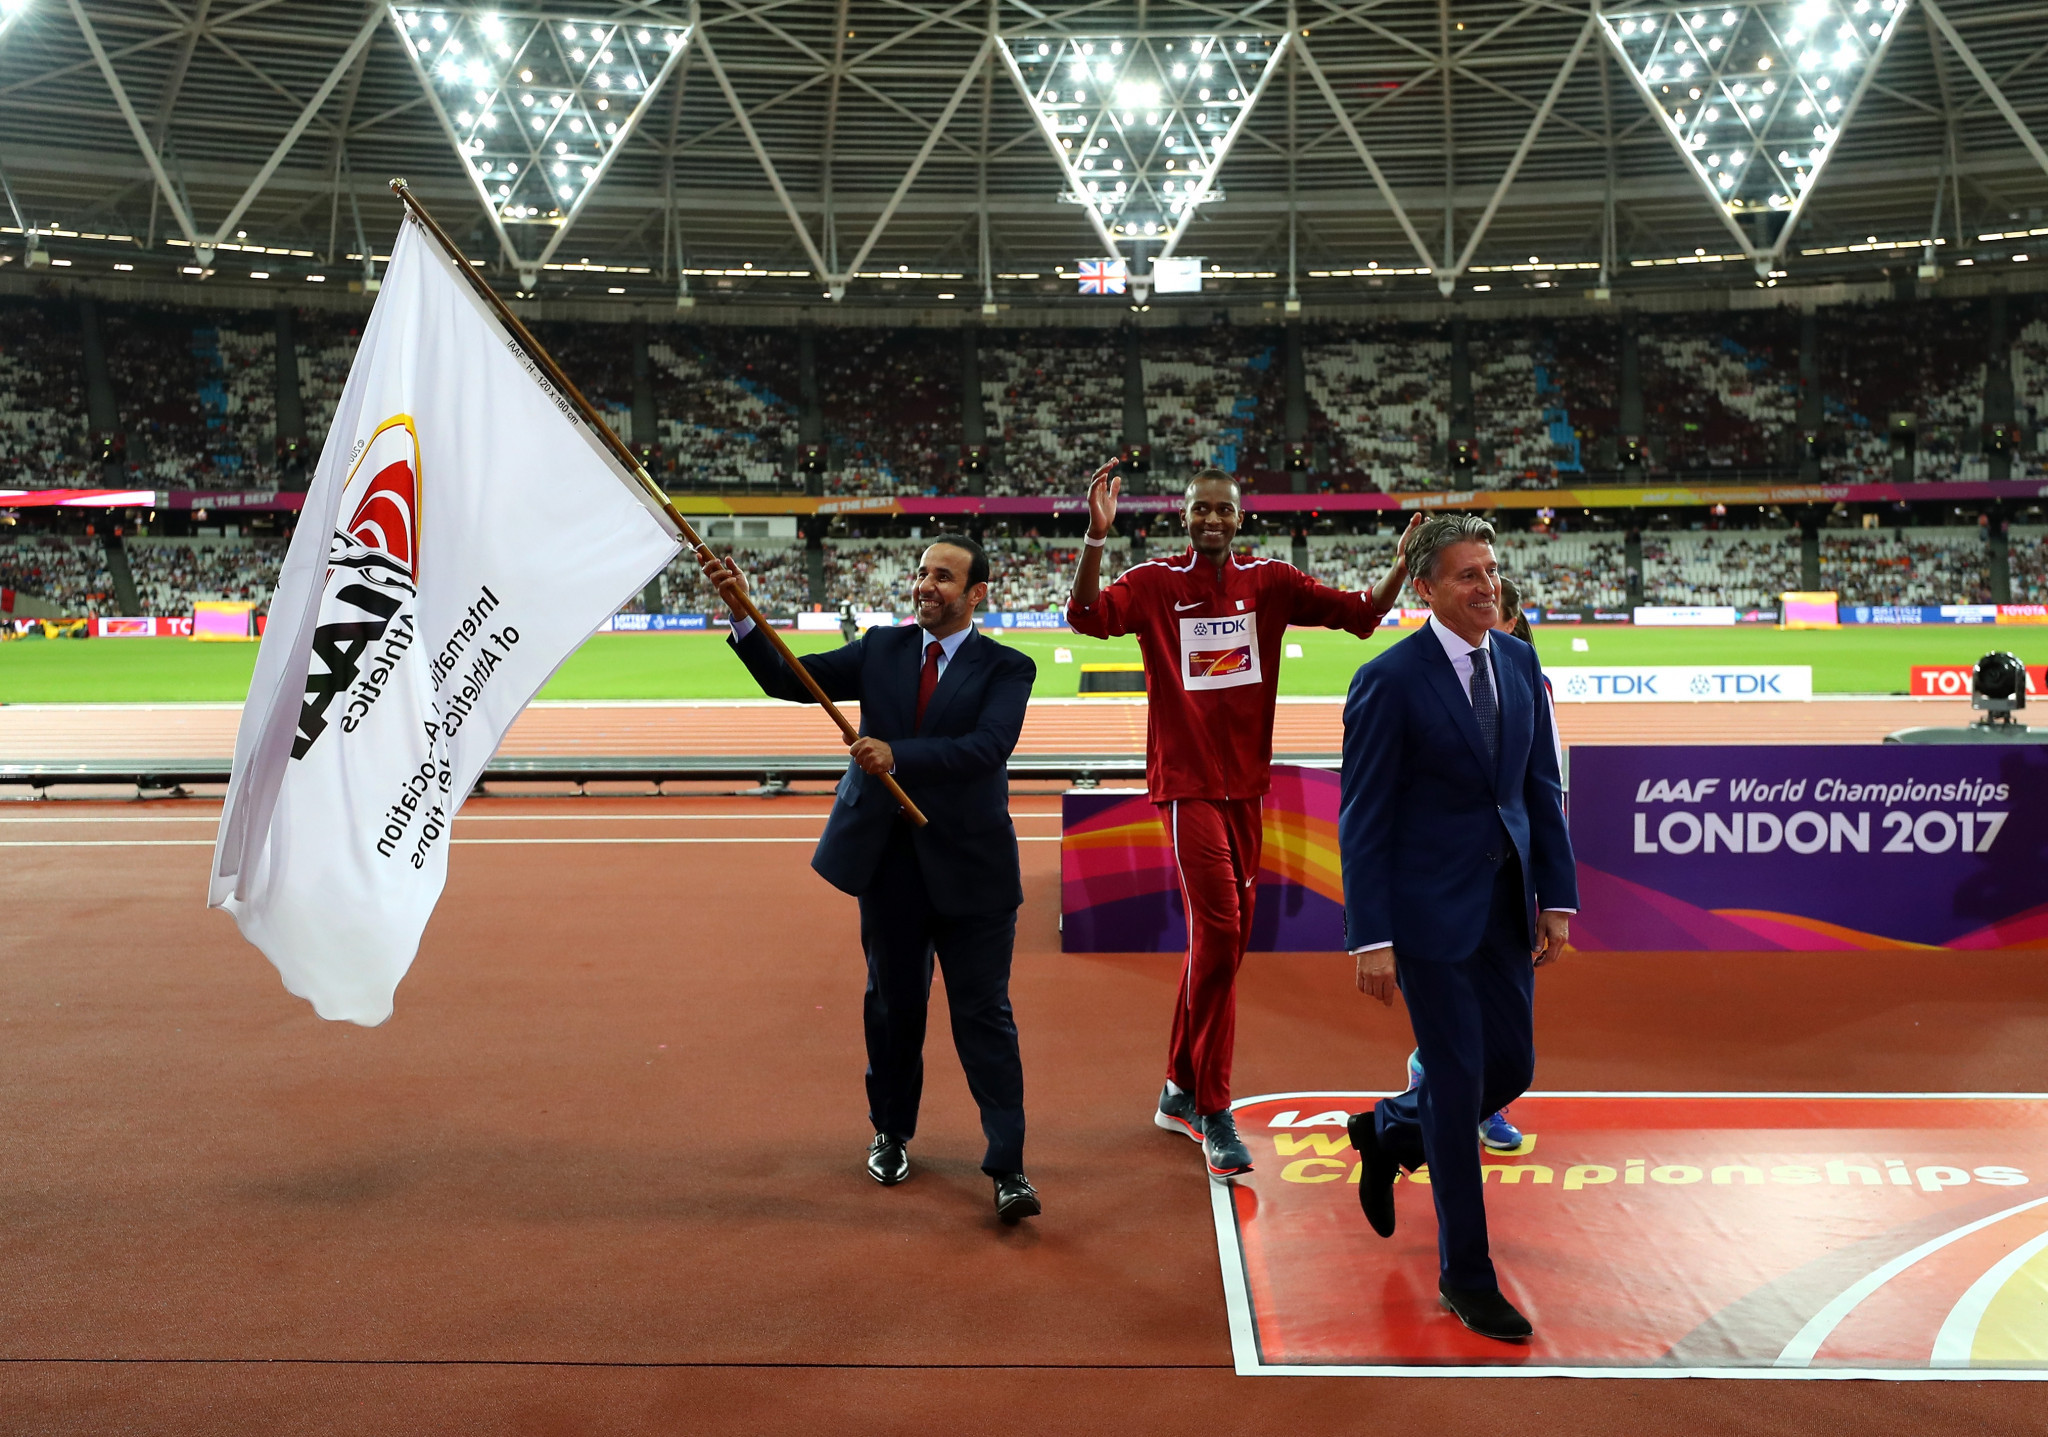 Qatar will host the next IAAF World Athletics Championships next year in Doha ©Getty Images